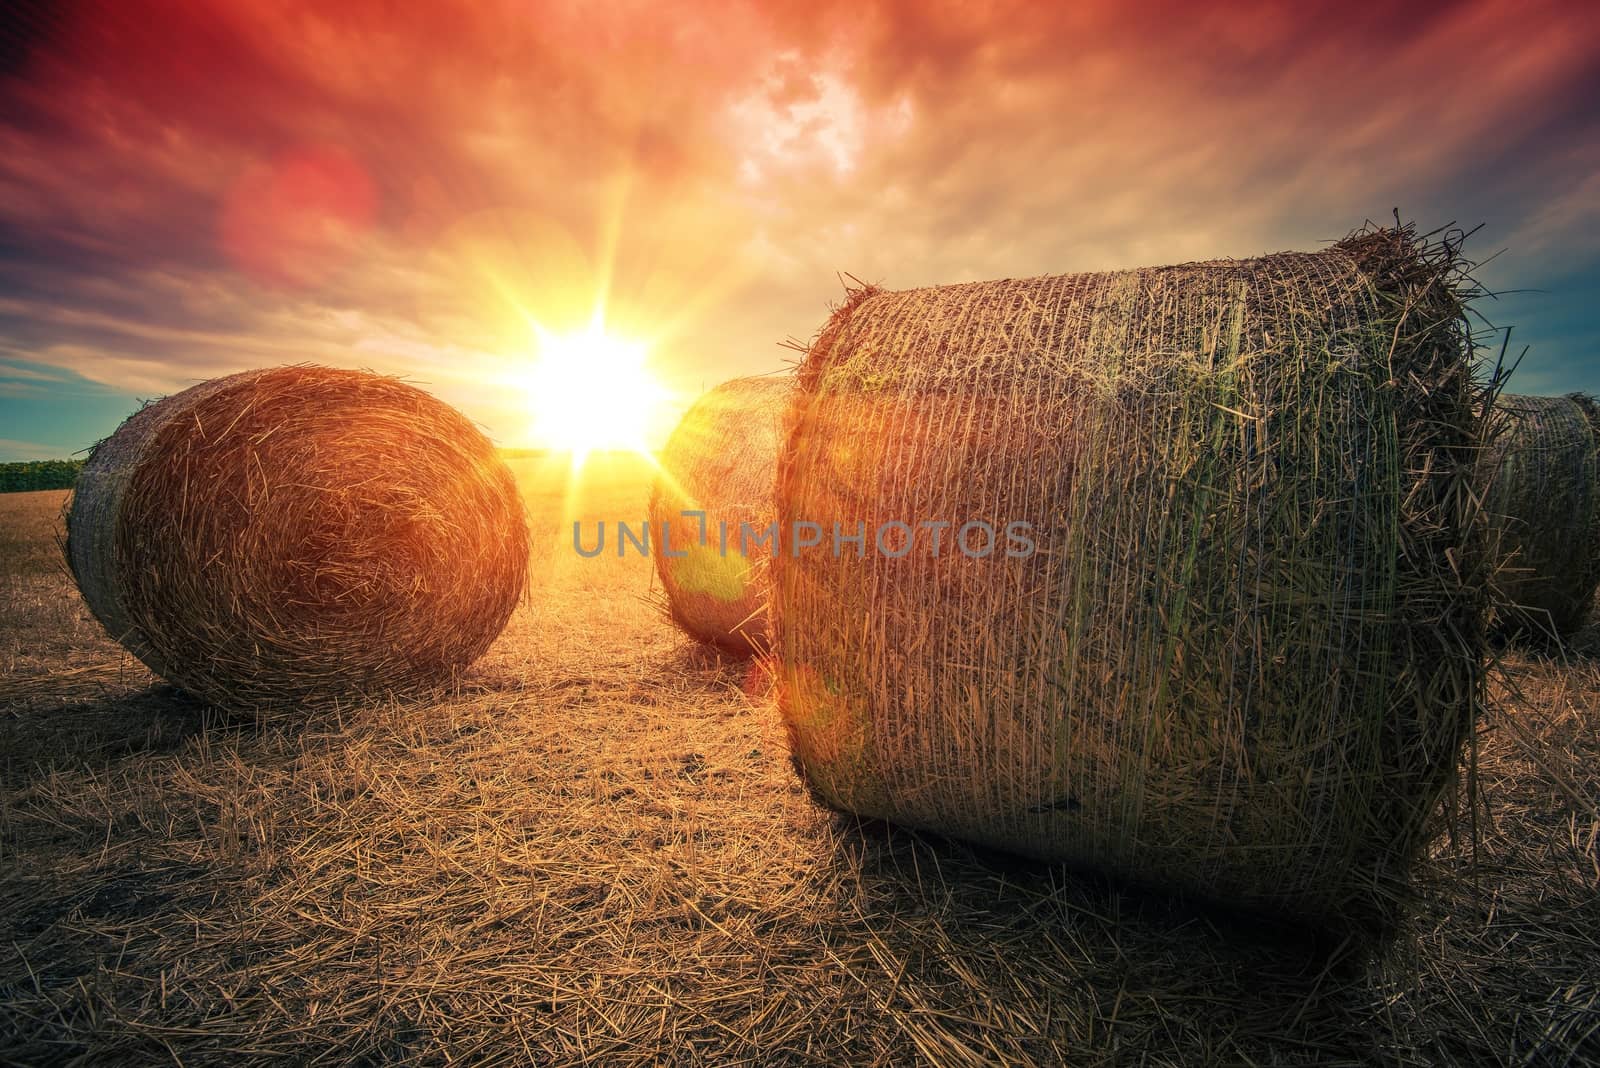 Baled Hay Rolls at Sunset by welcomia